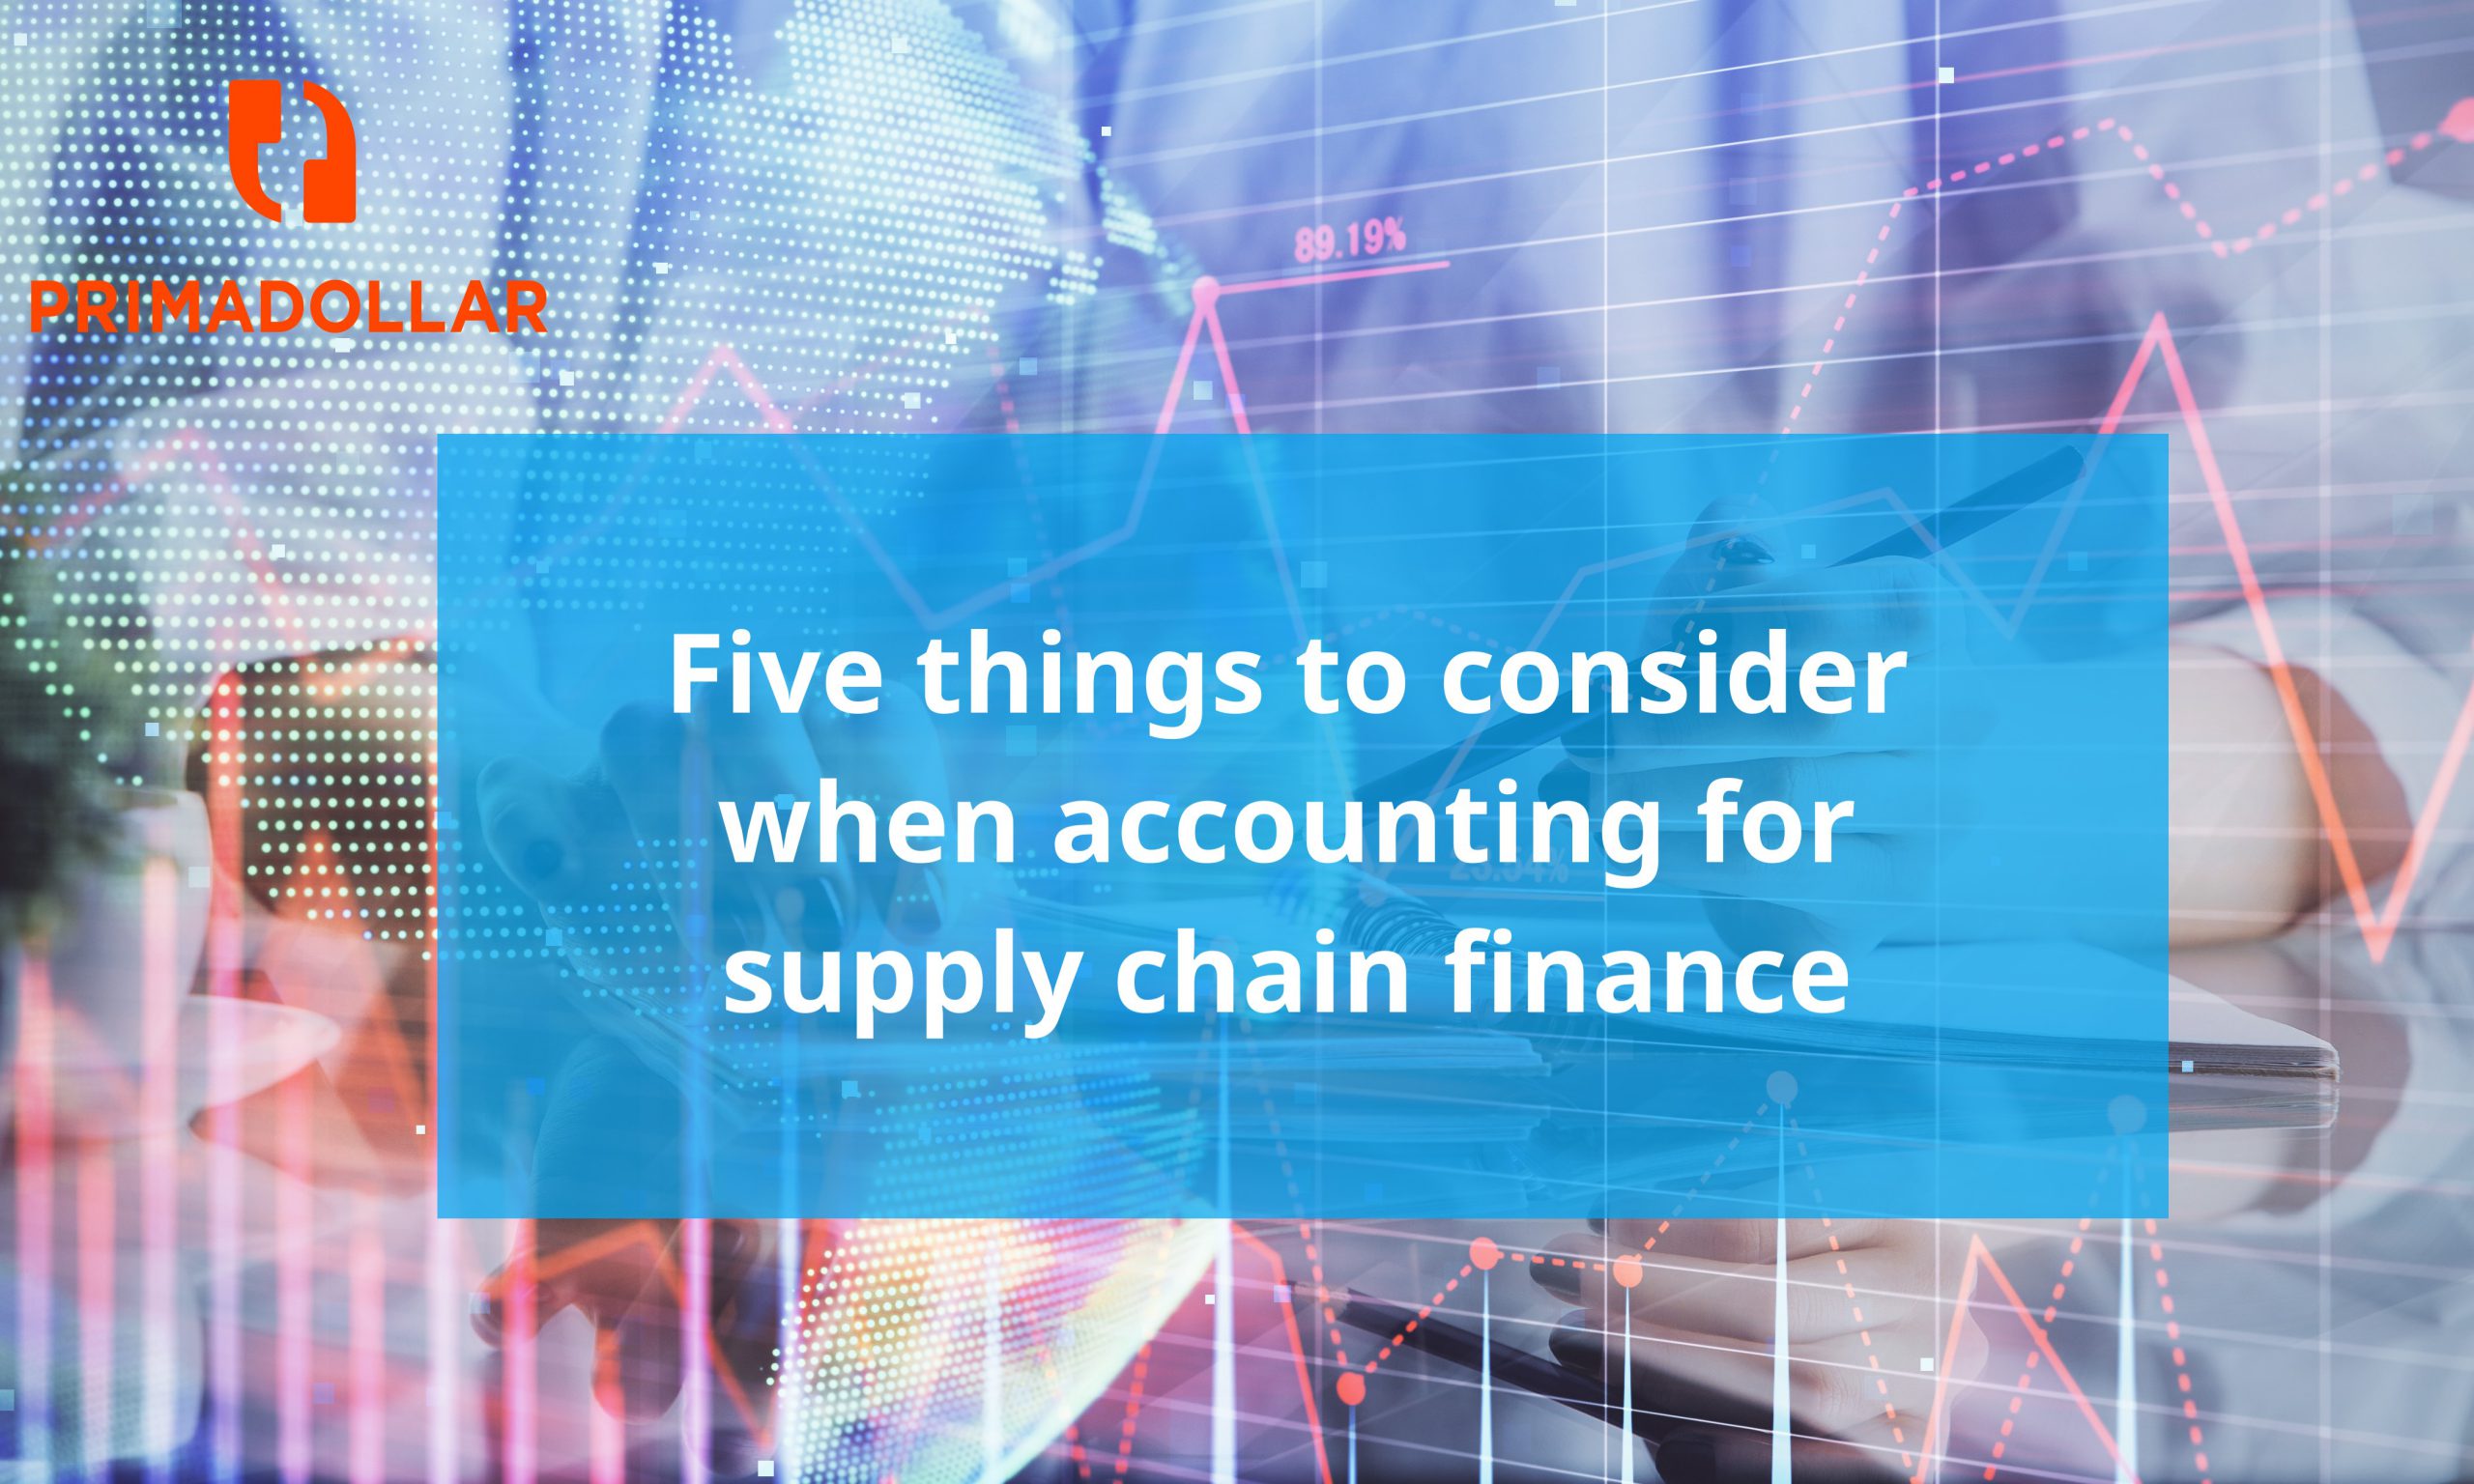 5 tests to account correctly for supply chain finance